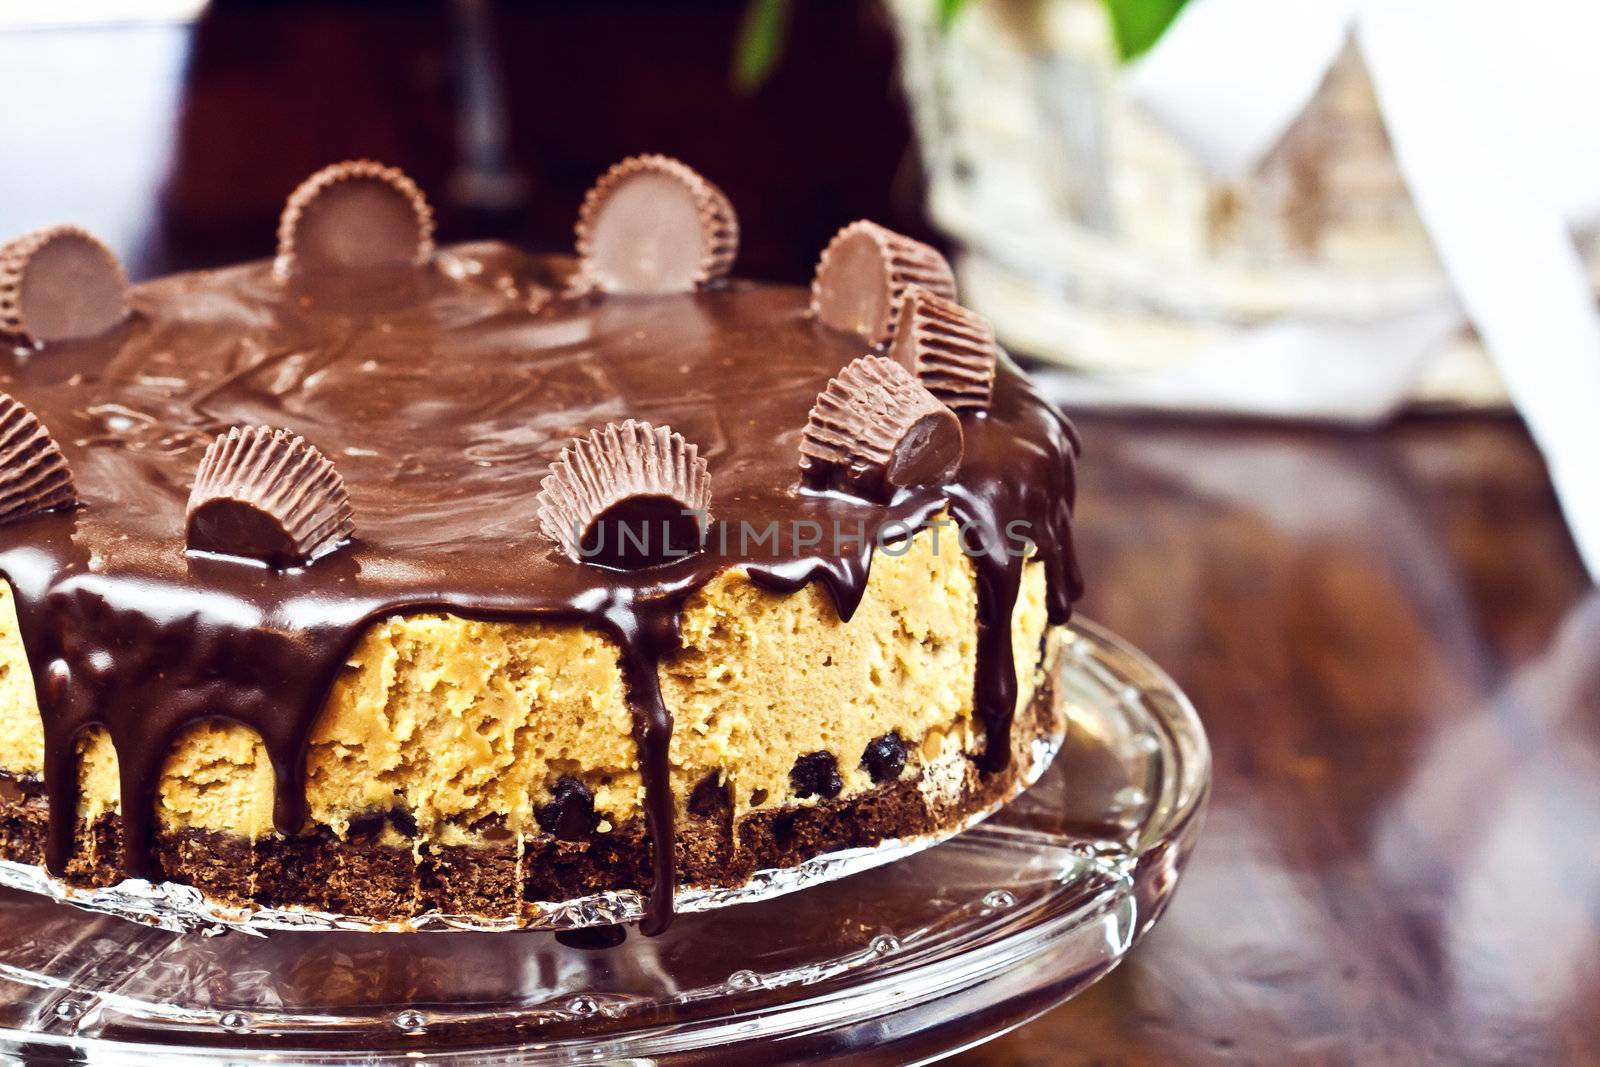 Home made chocolate peanut butter cheesecake